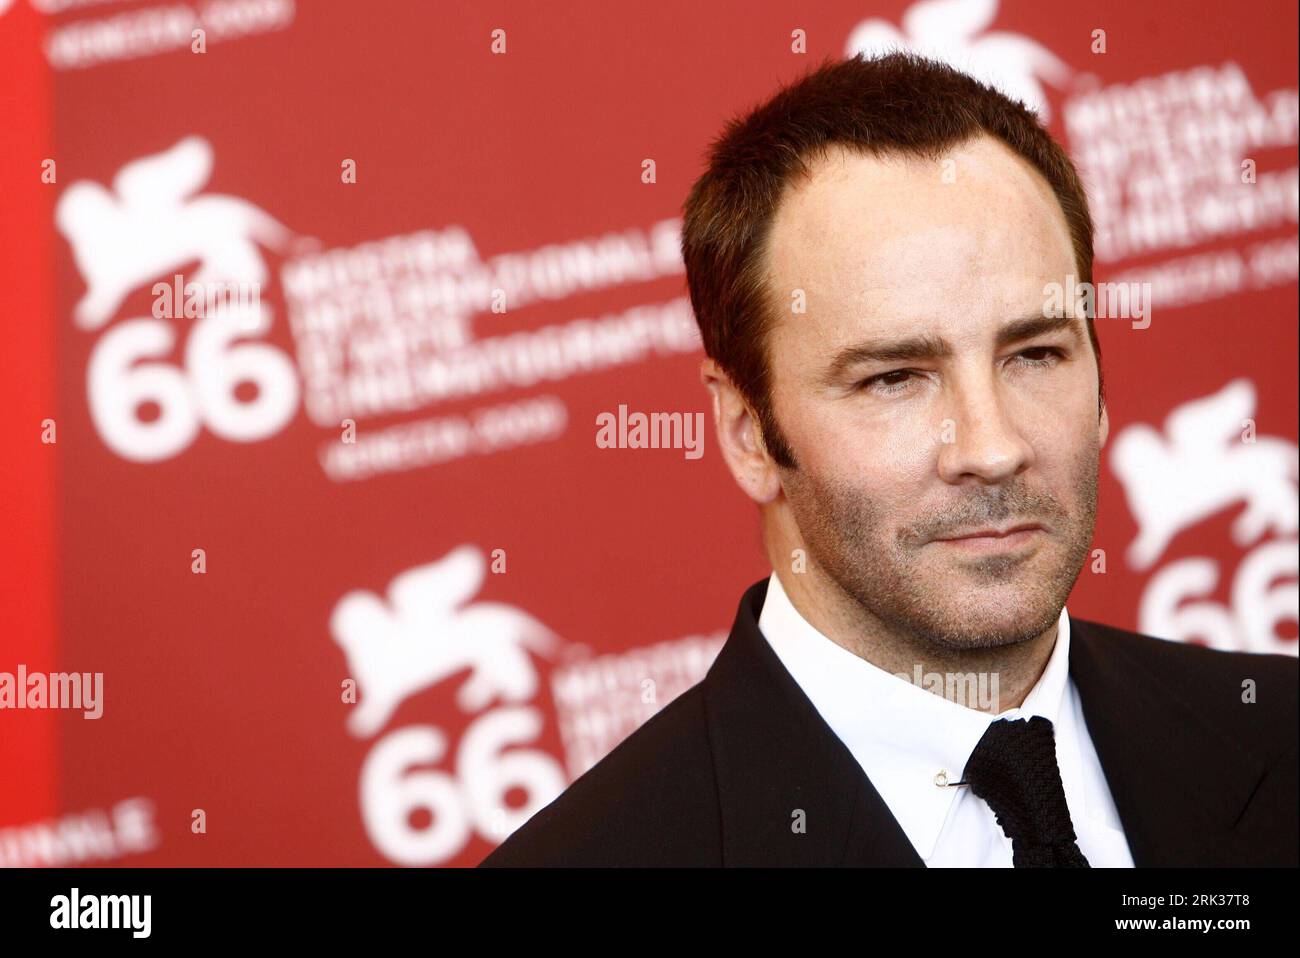 Bildnummer: 53348576  Datum: 11.09.2009  Copyright: imago/Xinhua (090911) -- VENICE, Sept. 11, 2009 (Xinhua) -- US director Tom Ford poses during the  for his film A Single Man at the 66th Venice International Film Festival in Venice Lido, Italy, on Sept. 11, 2009. (Xinhua Photo) (6)ITALY-VENICE INT L FILM FESTIVAL PUBLICATIONxNOTxINxCHN People Film Pressetermin Filmfestival o00 Biennale o00 kbdig xkg 2009 quer Aufmacher premiumd o0 Porträt Der Einzelgänger    Bildnummer 53348576 Date 11 09 2009 Copyright Imago XINHUA  Venice Sept 11 2009 XINHUA U.S. Director Tom Ford Poses during The for His Stock Photo